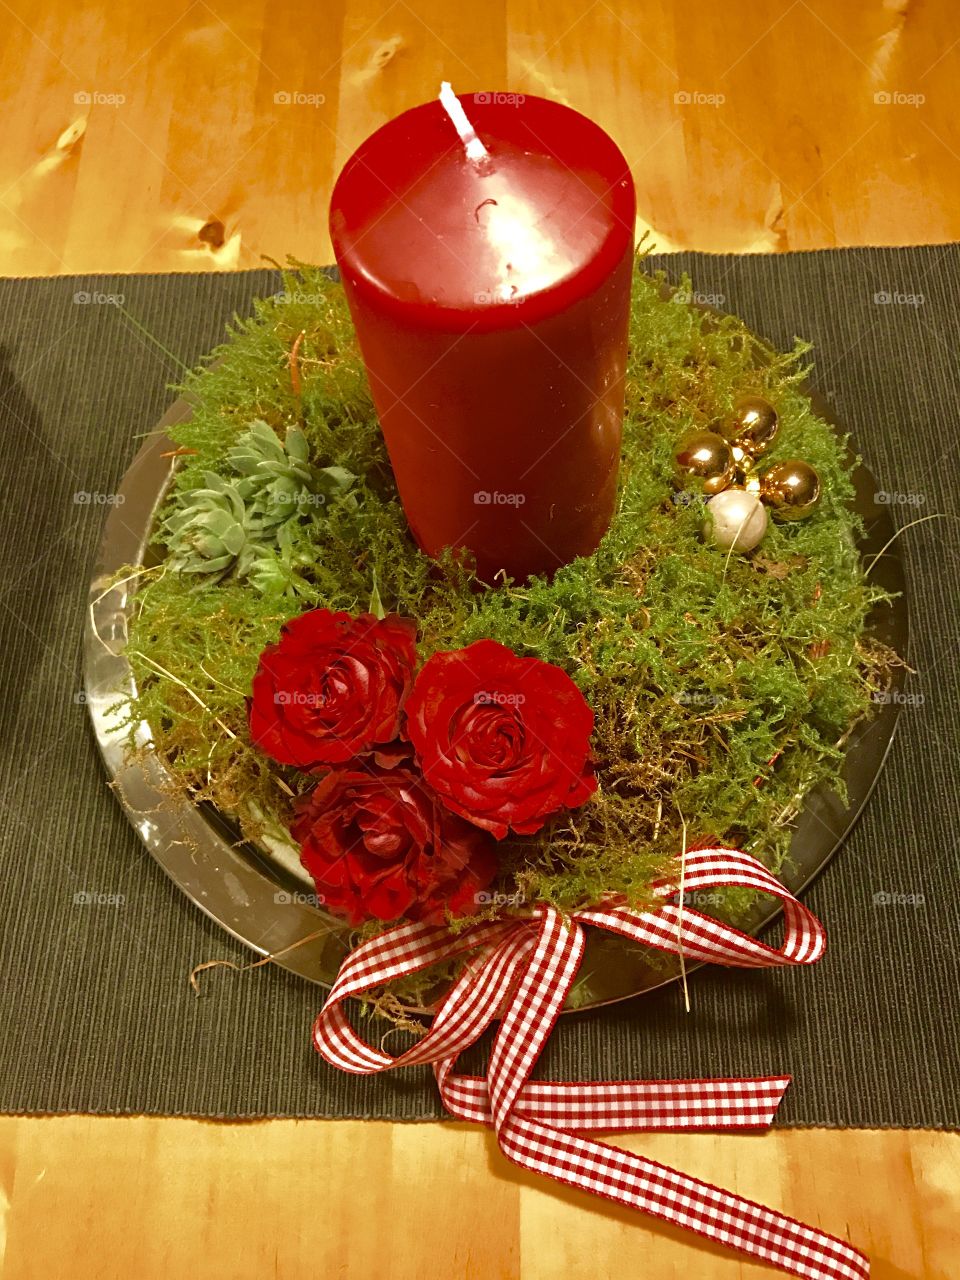 Love red roses at christmastine 